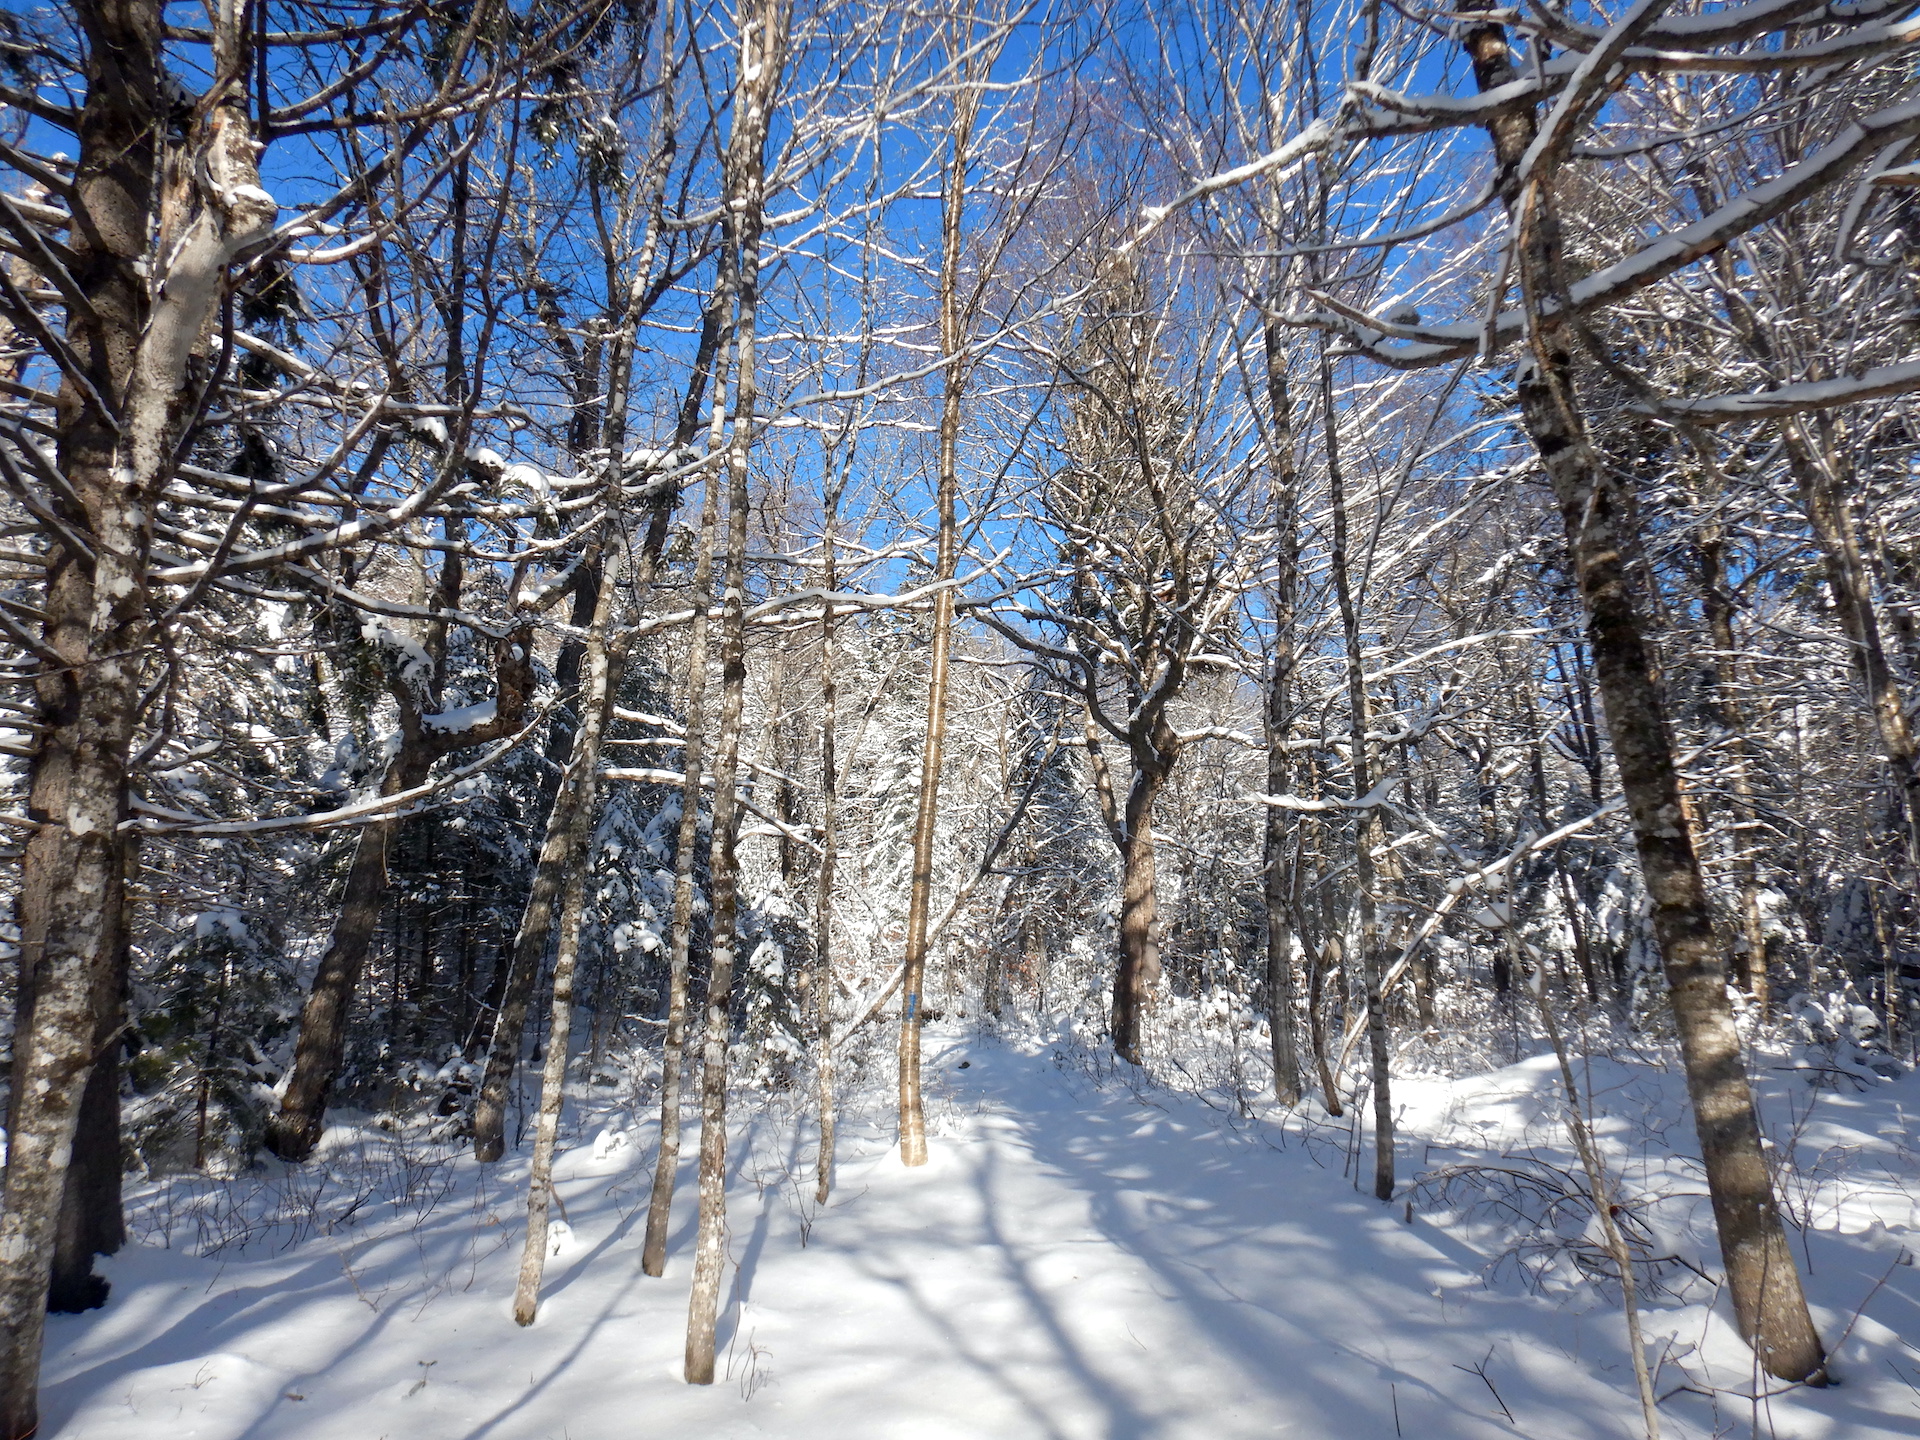 view of snowy forest. The trees are mostly deciduous and bare of leaves. Snow covered the ground.